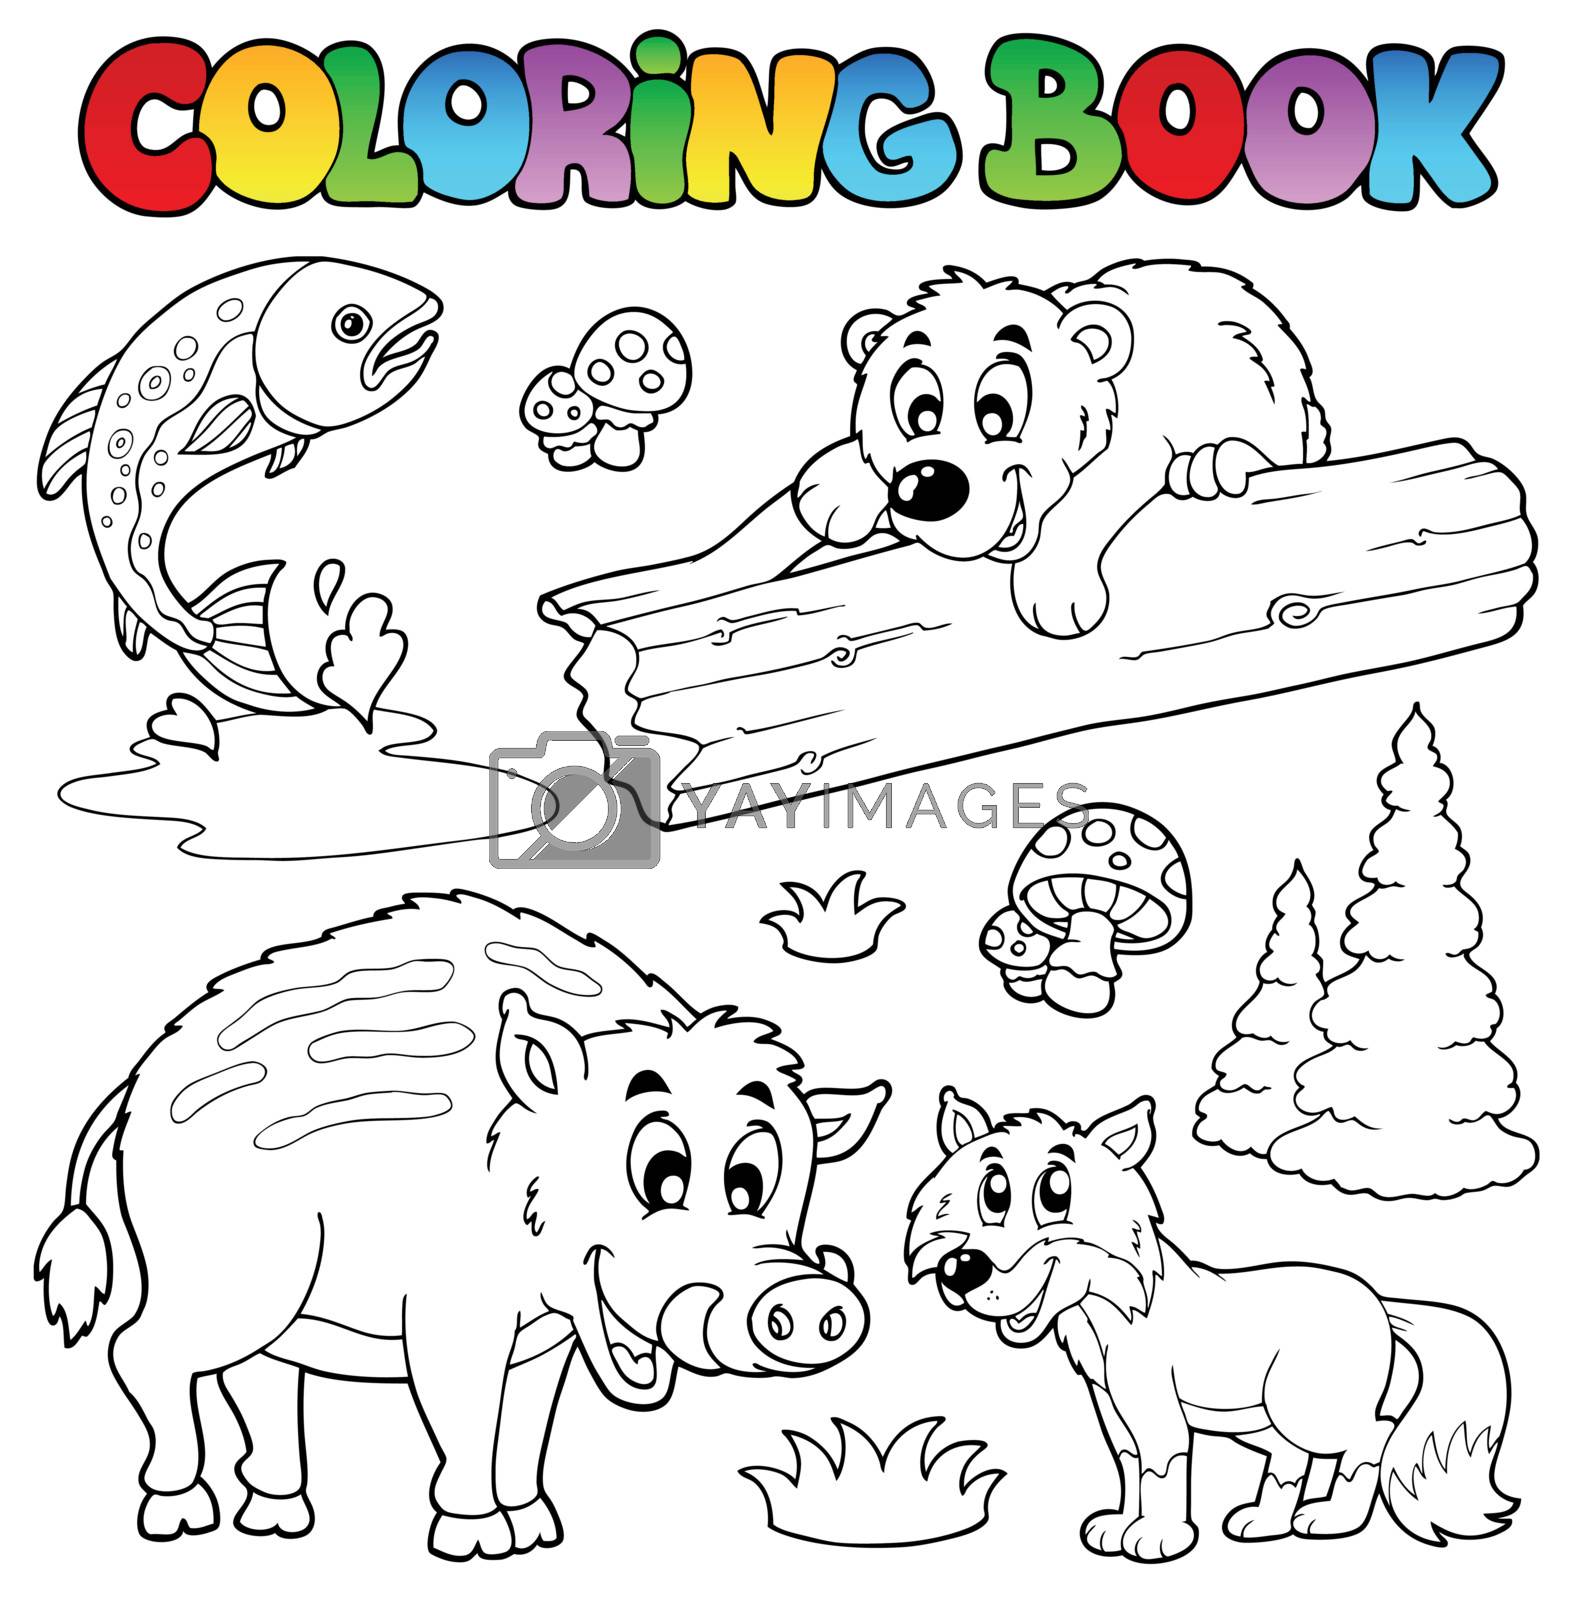 Royalty free image of Coloring book with woodland animals by clairev